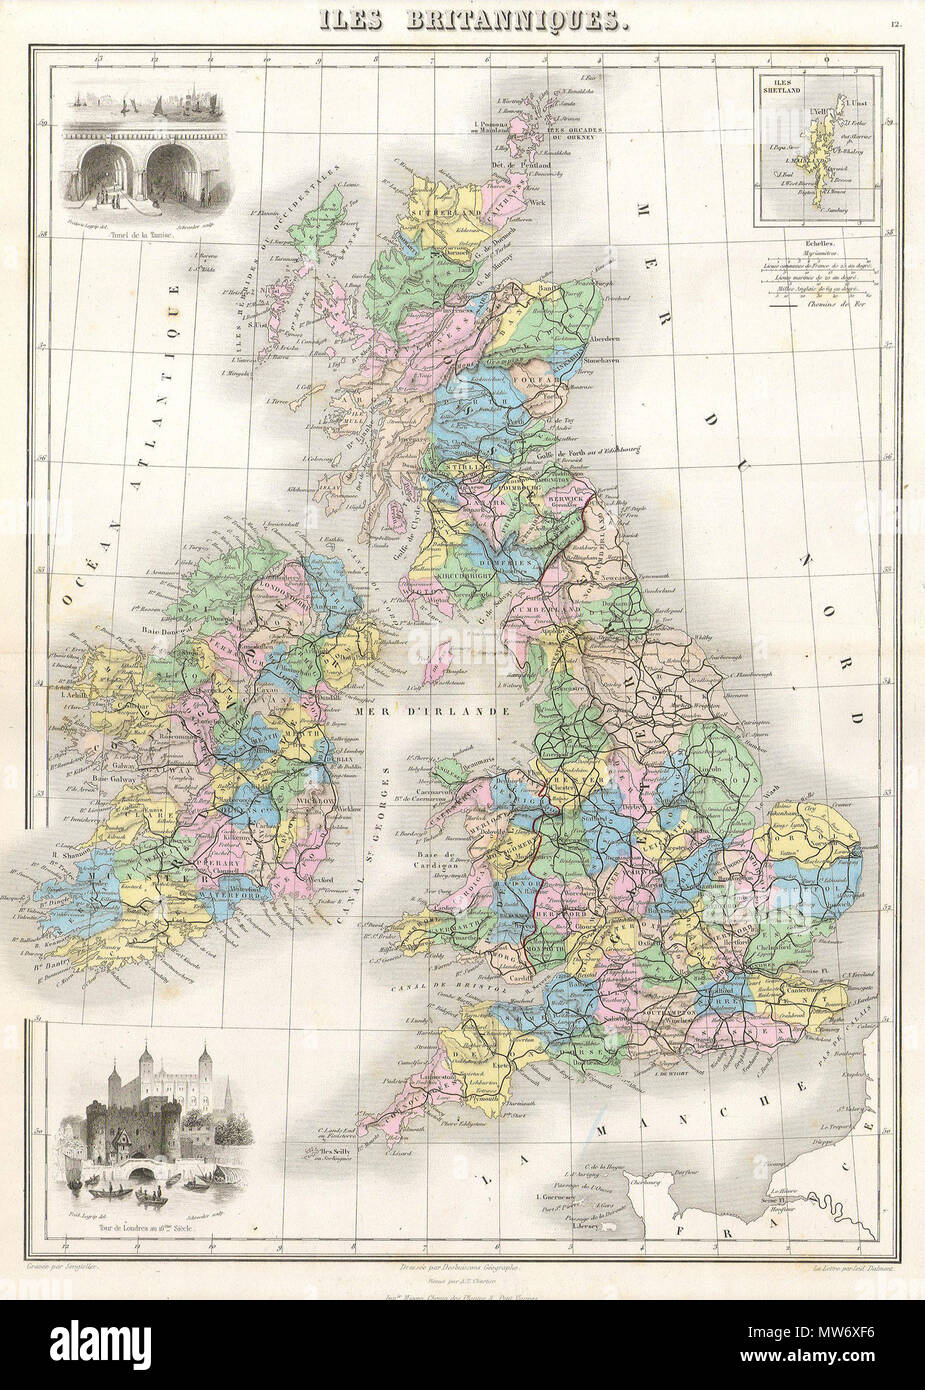 . Iles Britanniques.  English: This hand colored map of the British Isles is a steel plate engraving, dating to 1878 by the well regarded French cartographer Migeon. It includes England, Scotland, Ireland and Wales. Migeon’s Geographie Universelle, published in Paris, is one of the last fine atlases produced in the 19th century. It contains many stylistic elements of early 19th century cartography such as full hand coloring, numerous decorative vignettes, and high quality low acid paper. . 1878  10 1878 Migeon Map of the British Isles ( England, Ireland, Scotland ) - Geographicus - BritishIsle Stock Photo